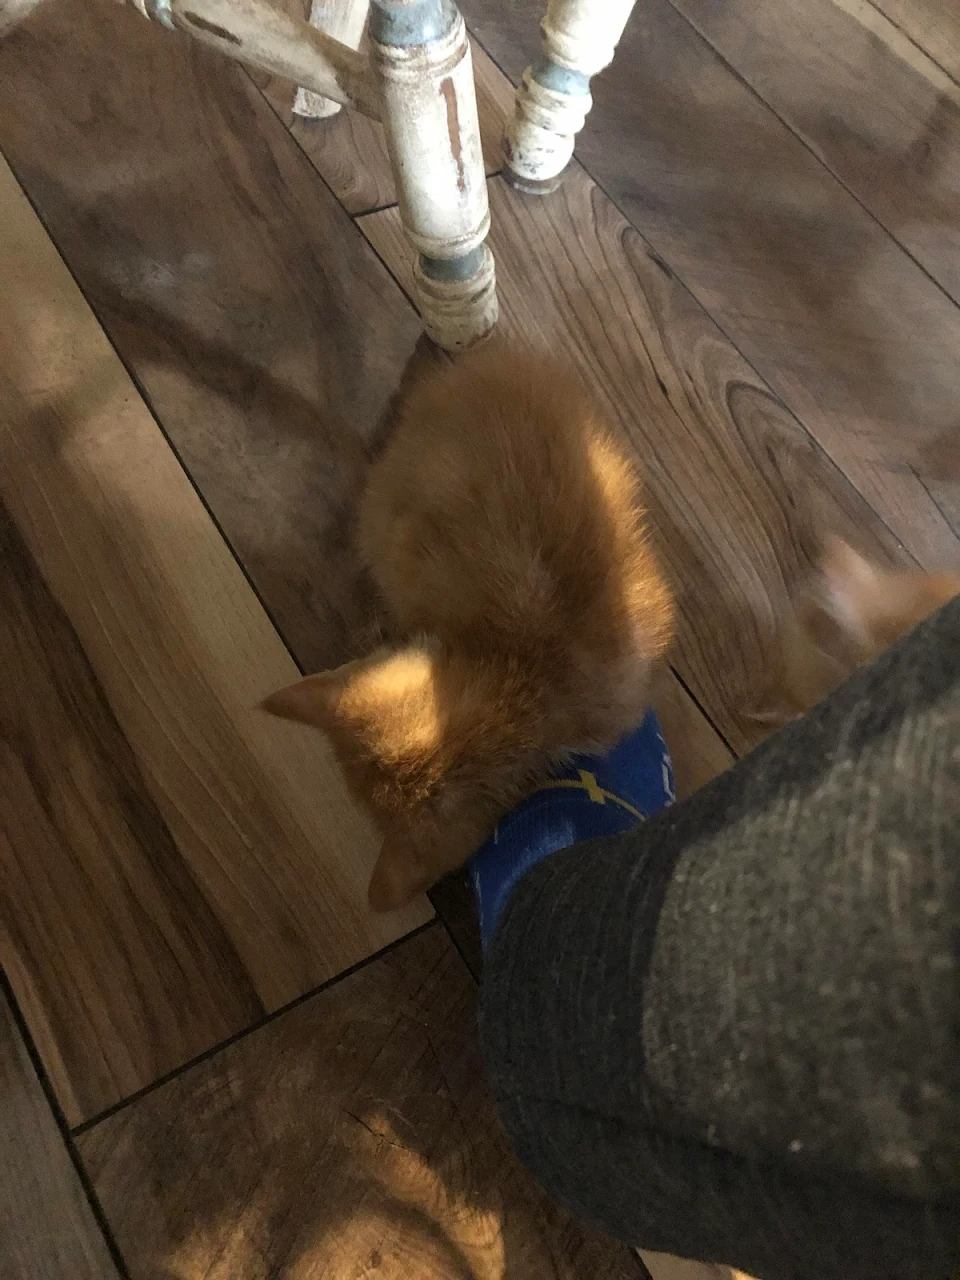 I was just Vibing eating some food and then my kitten decided to sleep on my foot, not part of it, like he’s balancing on my entire foot and just went to bed. What do I do?